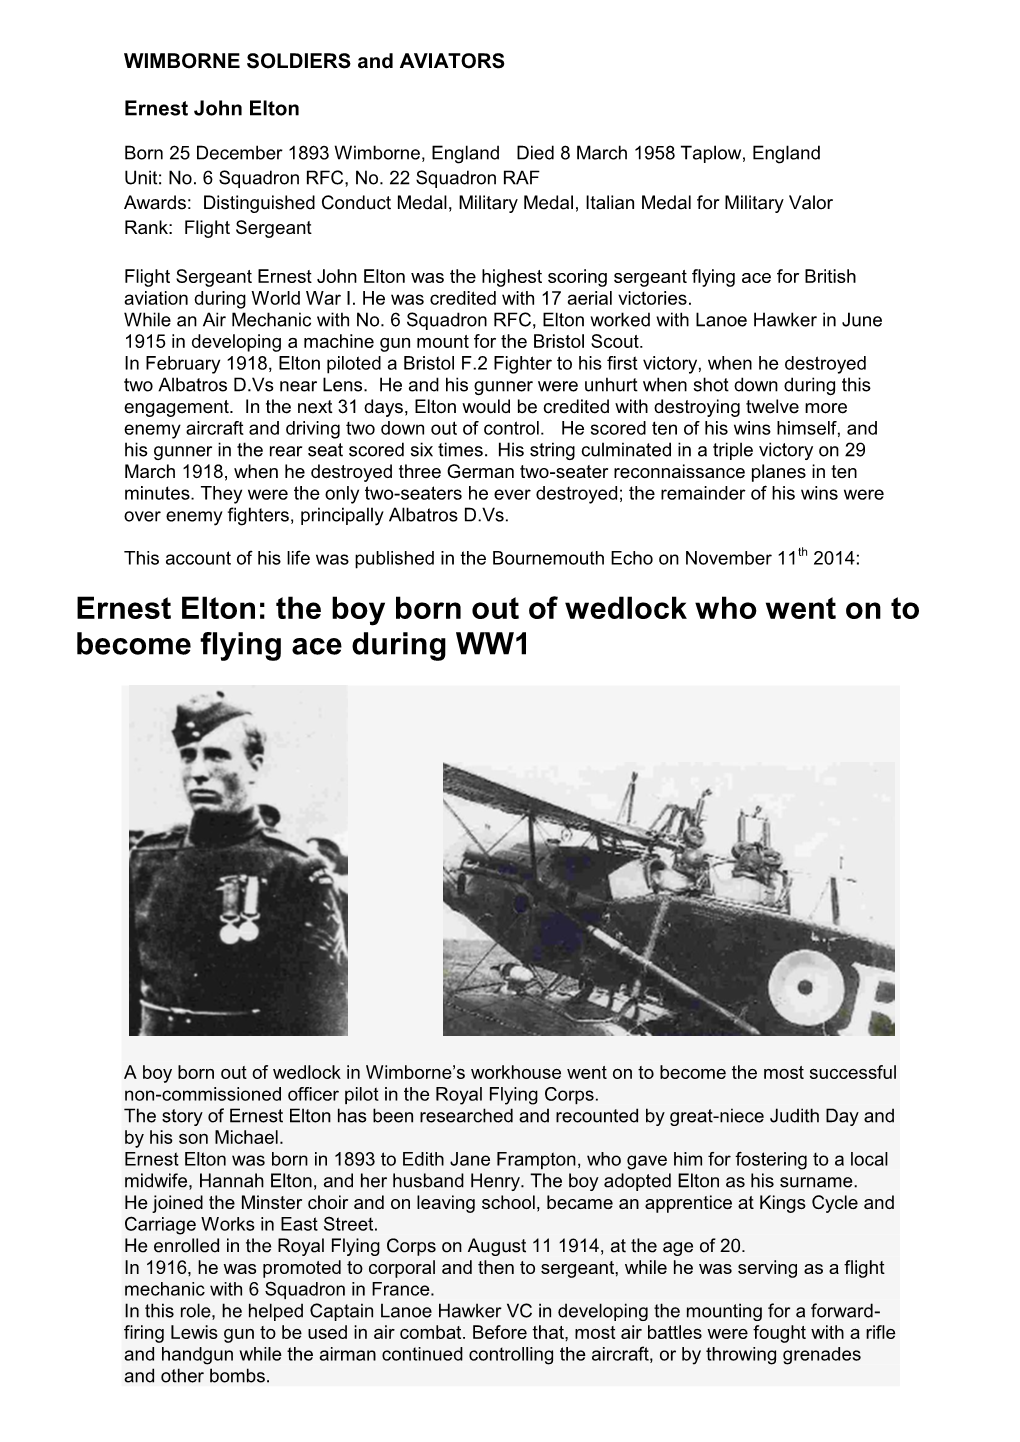 Ernest Elton: the Boy Born out of Wedlock Who Went on to Become Flying Ace During WW1